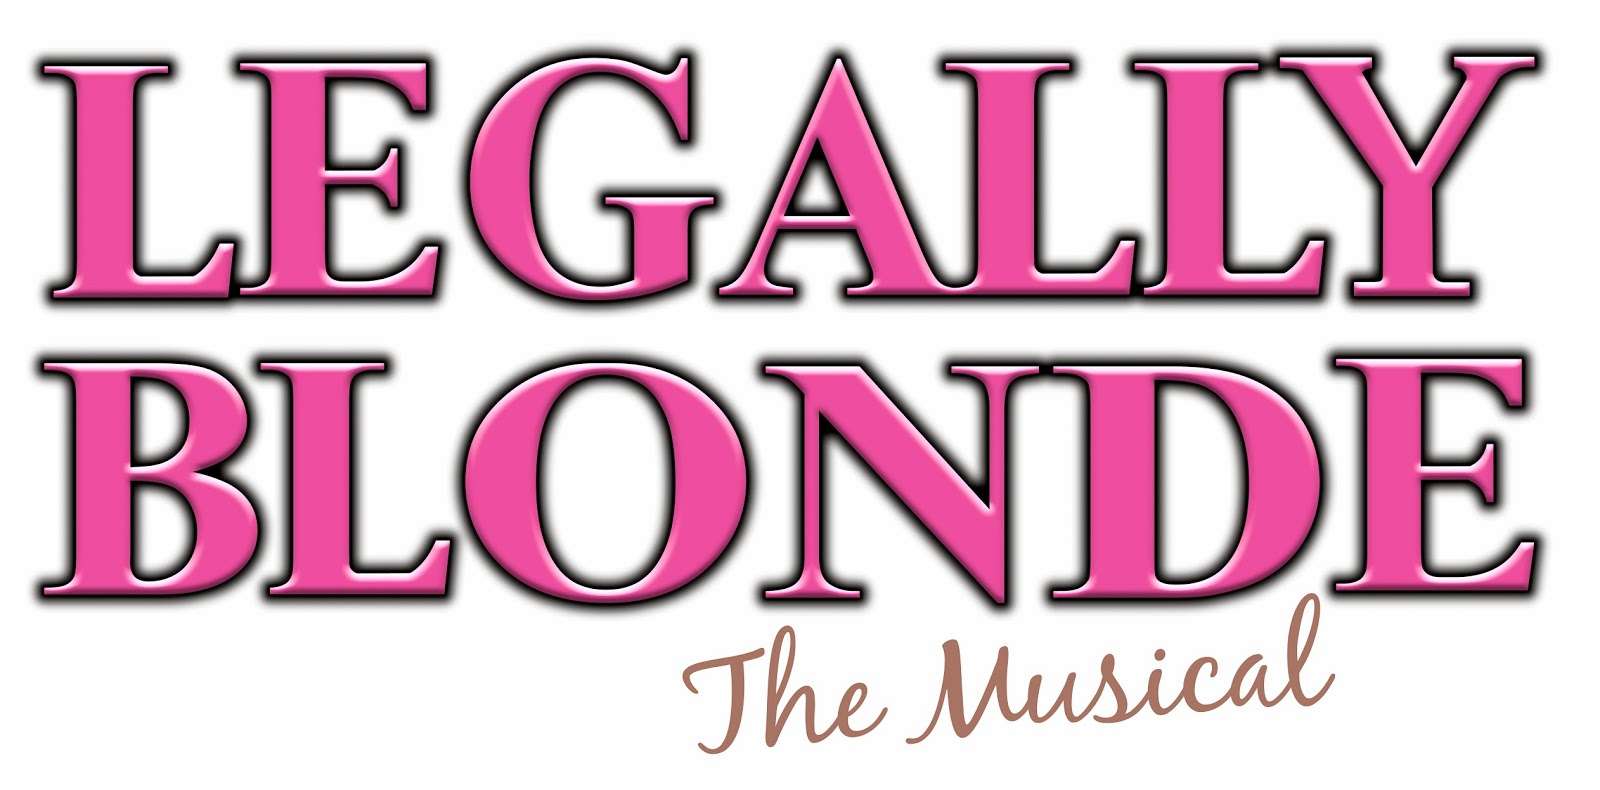 Legally Blonde: The Musical Overview (with GIFS!)